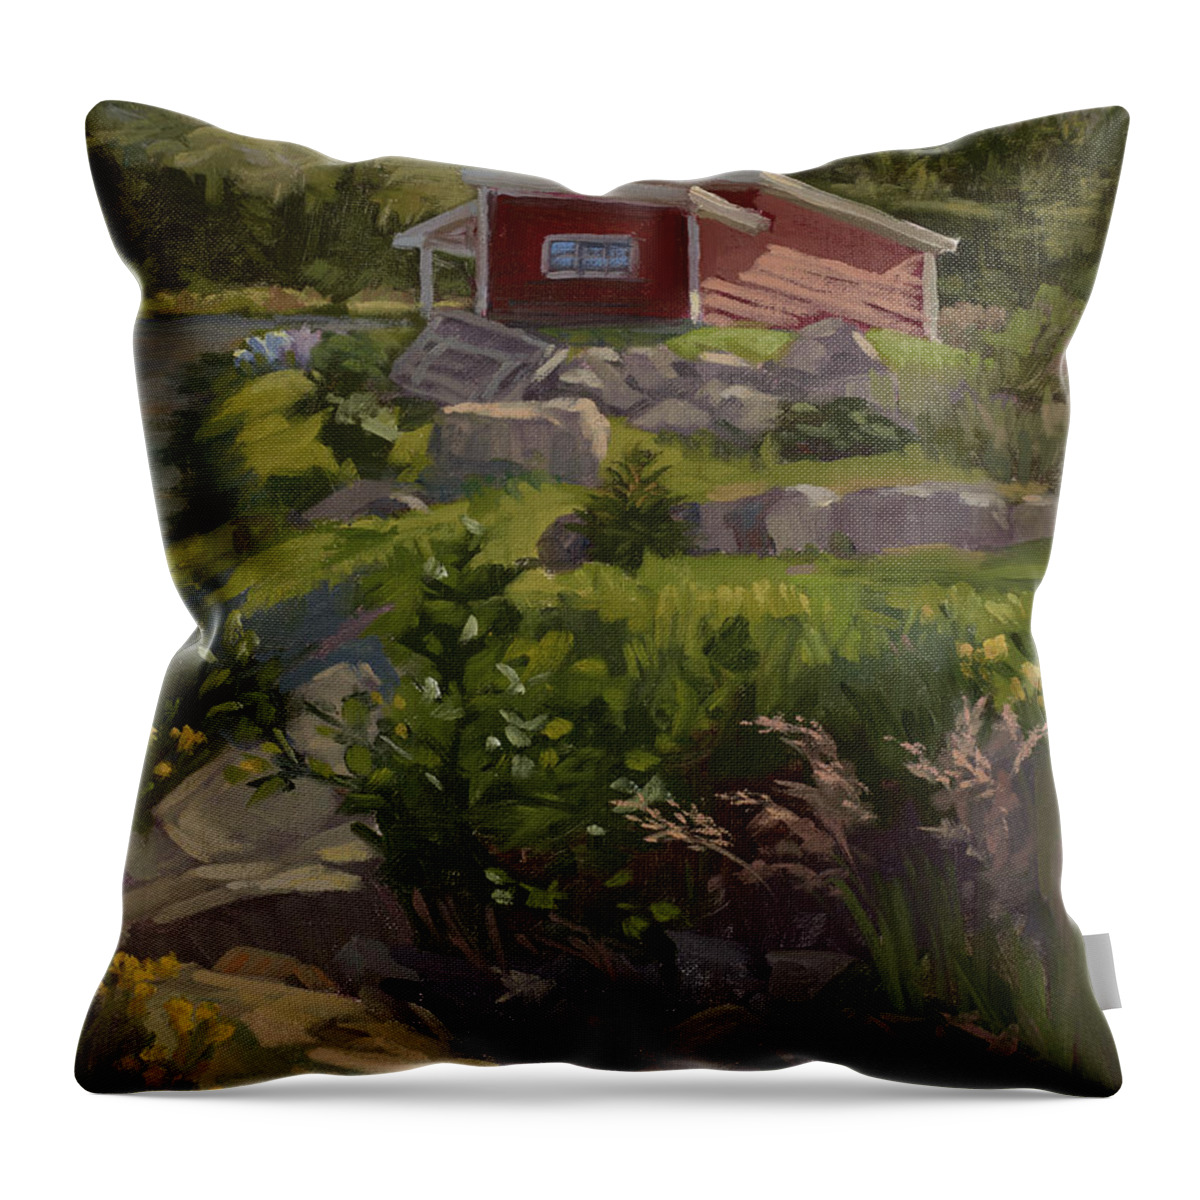 Red Throw Pillow featuring the painting The Shed by Jane Thorpe